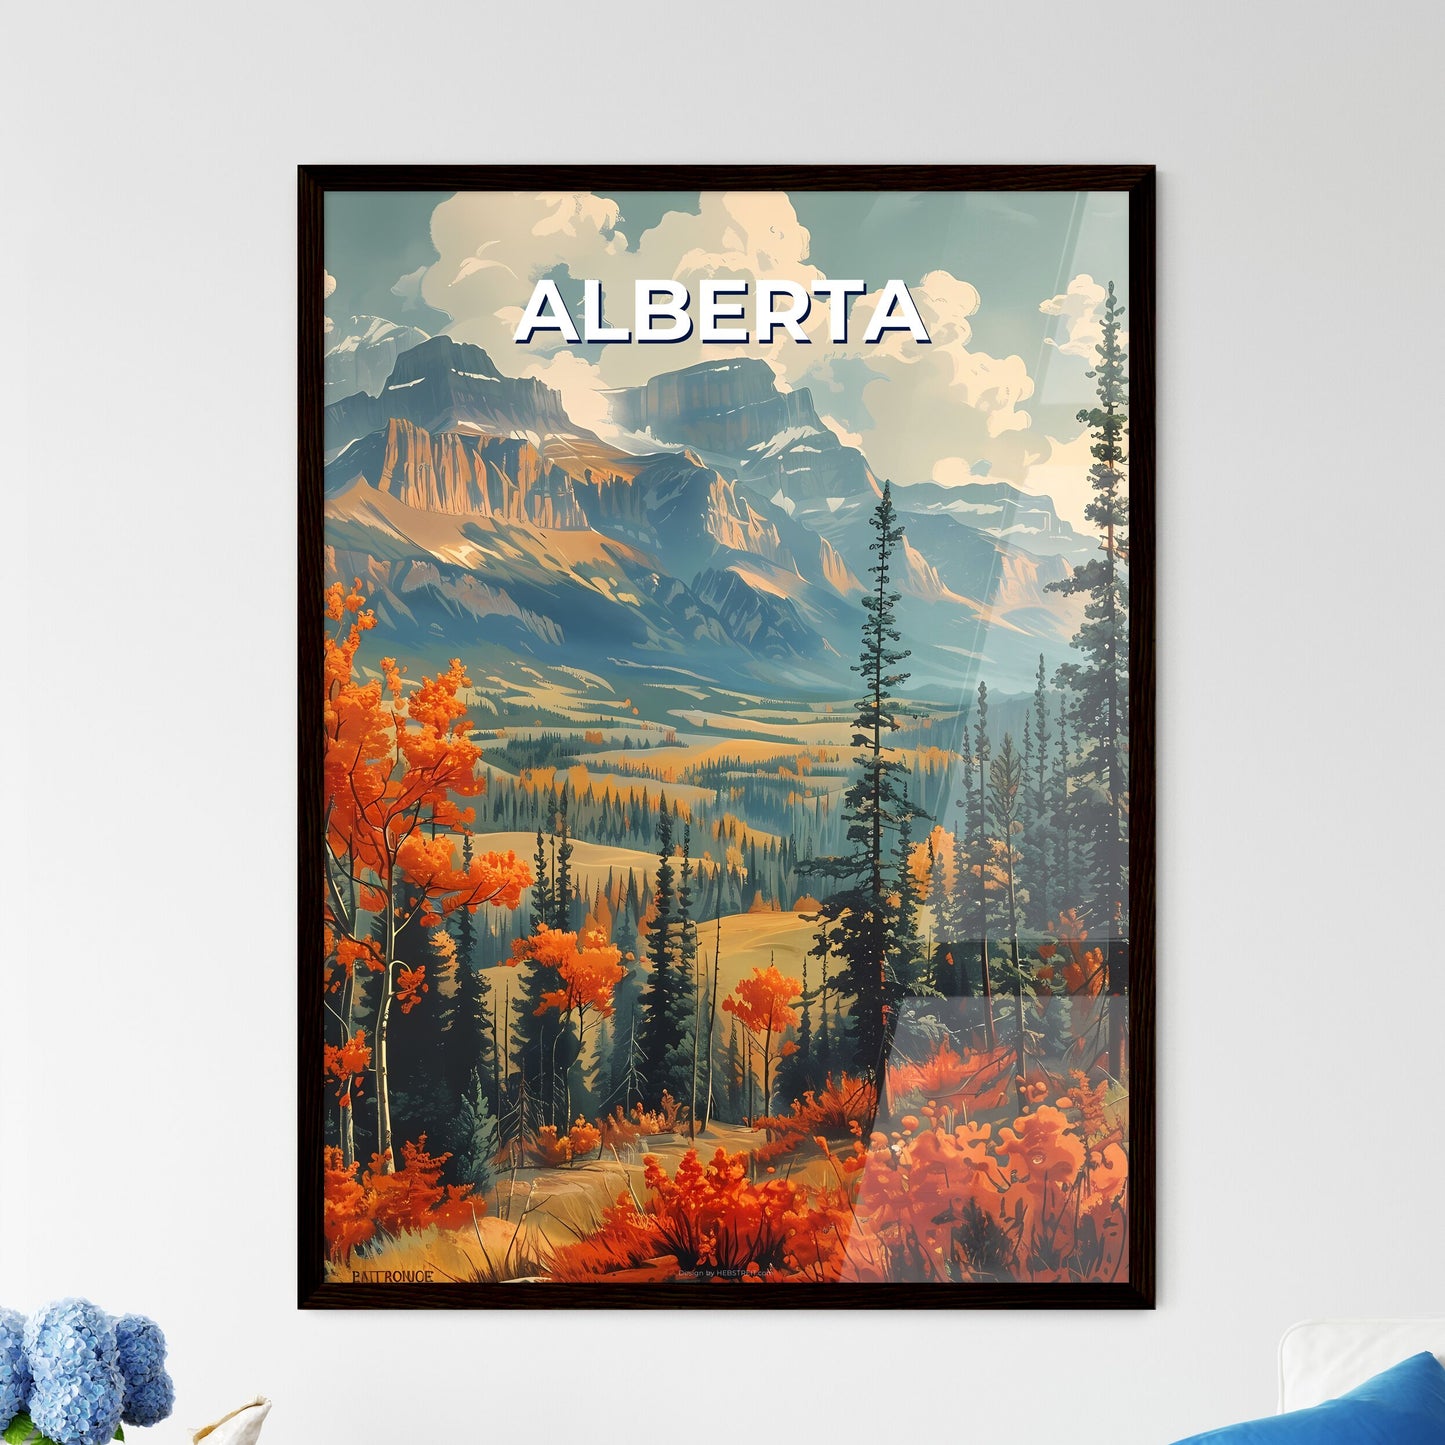 Vibrantly Painted Landscape Depicting the Mountains and Trees of Alberta, Canada